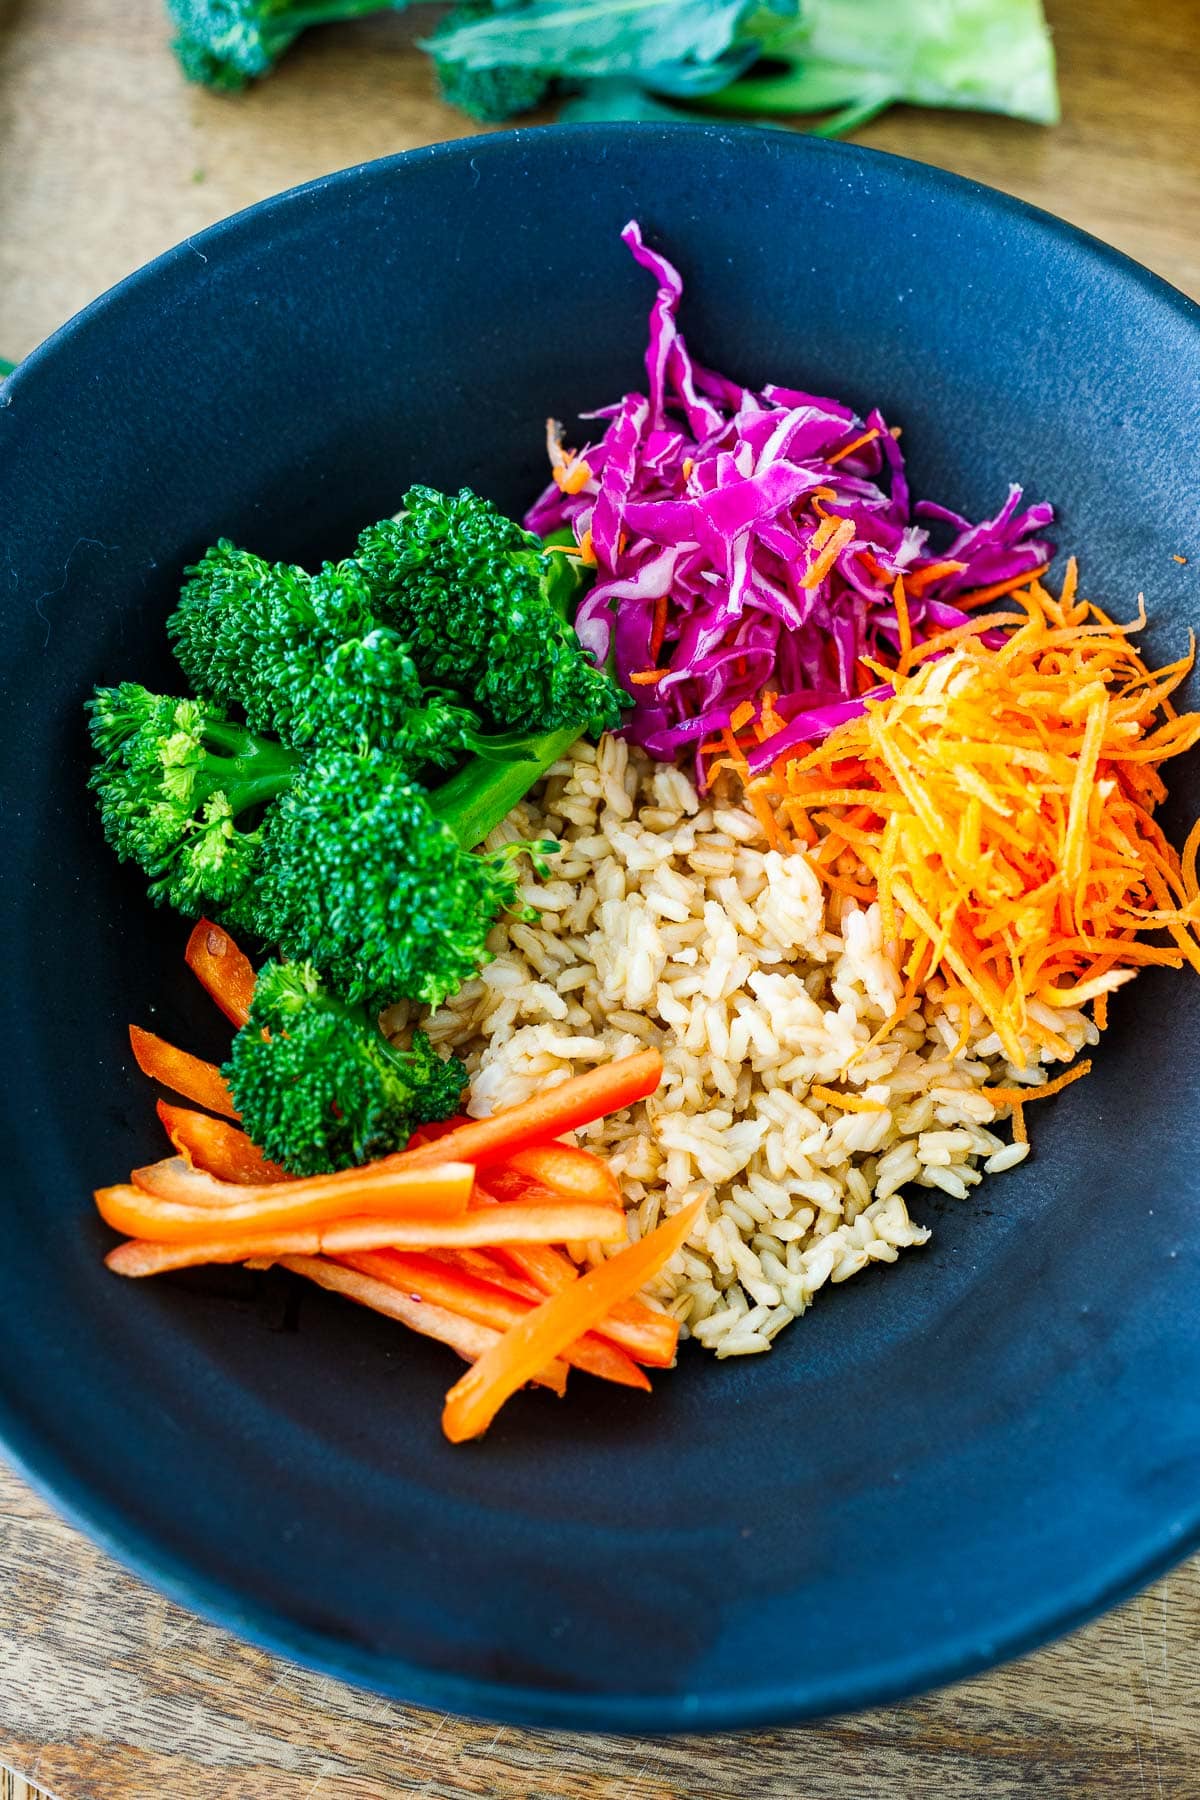 assembling rice bowl with brown rice, shredded carrots and cabbage, sliced bell pepper, and steamed broccoli.